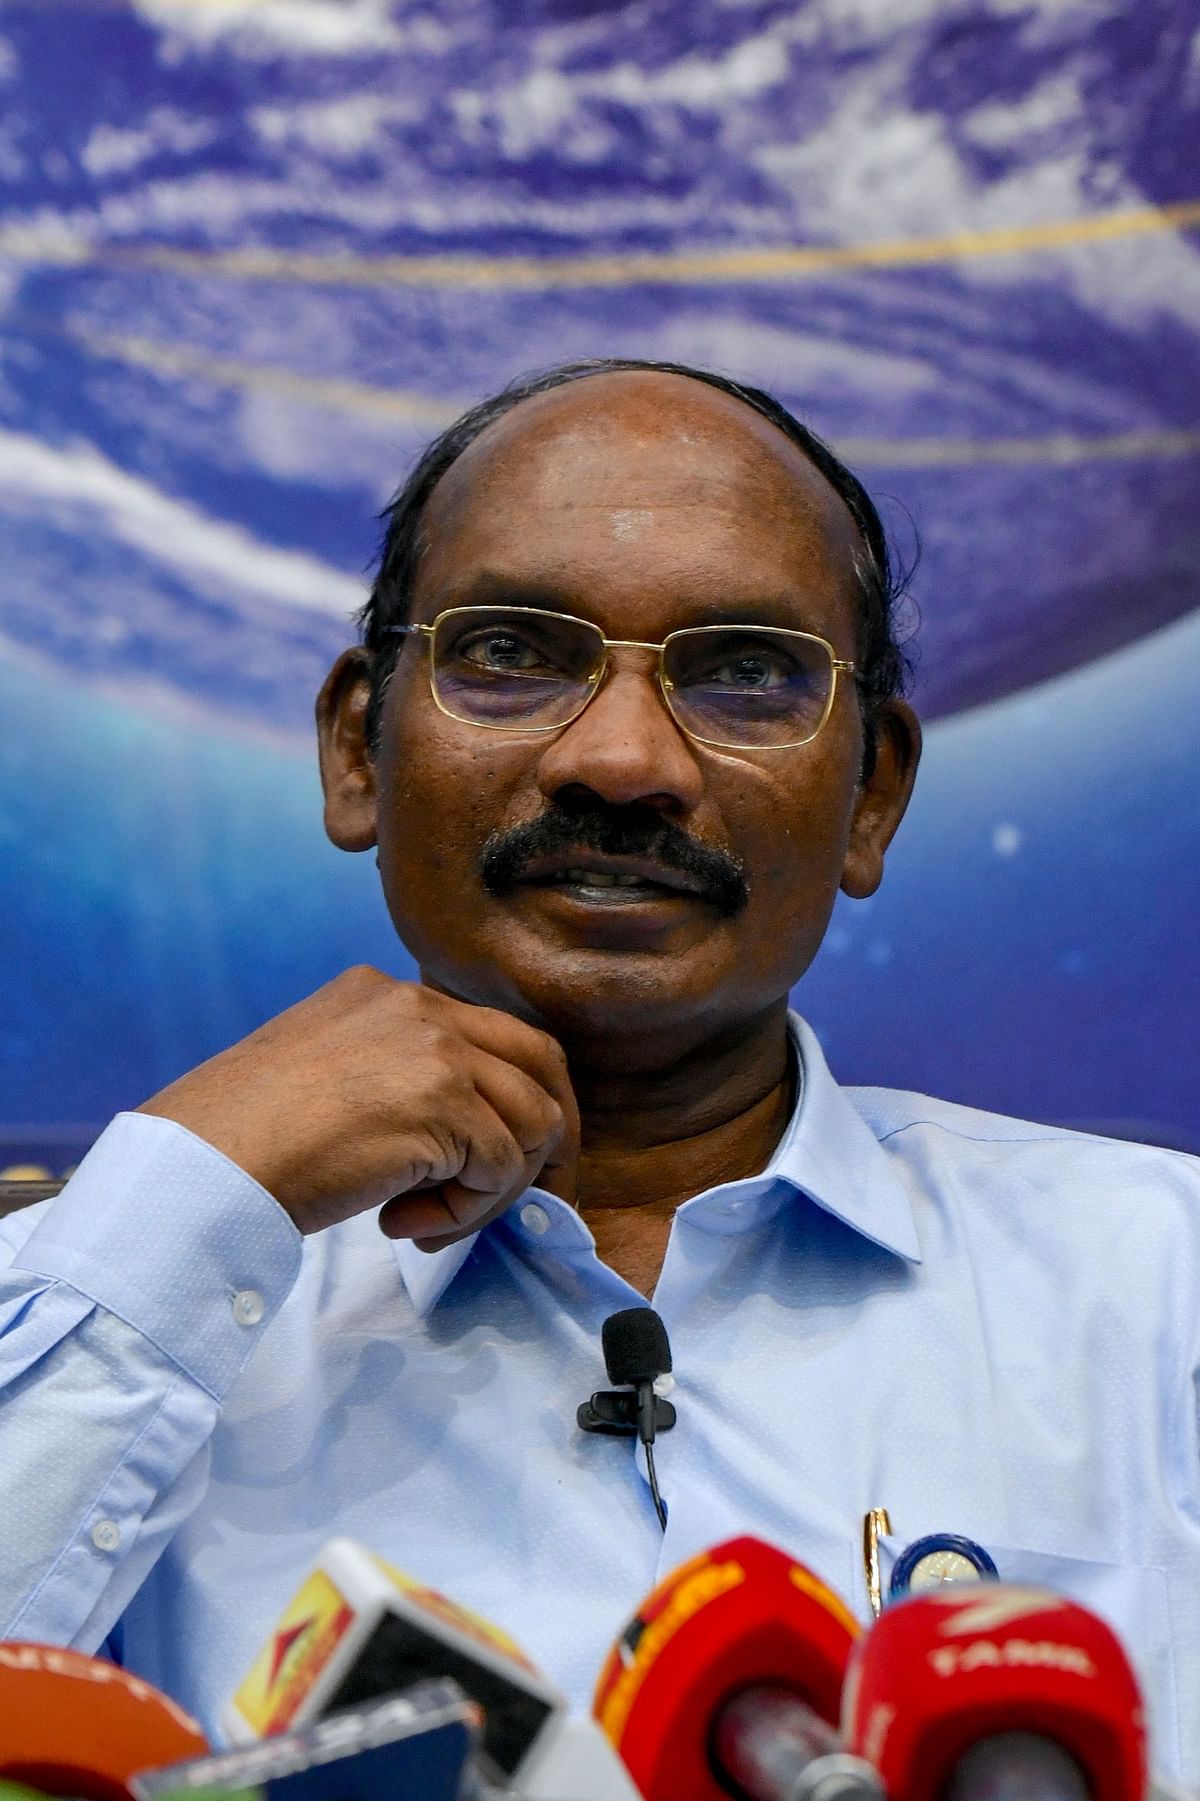 Chairman of the Indian Space Research Organisation (ISRO) Kailasavadivoo Sivan gestures as he announces ISRO`s plans for 2020 including the progress in `Chandrayaan 3` moon mission and `Gaganyaan` mission for putting an Indian astronaut into space, during a press conference held at the ISRO headquarters in Bangalore on 1 January 2020. Photo: AFP